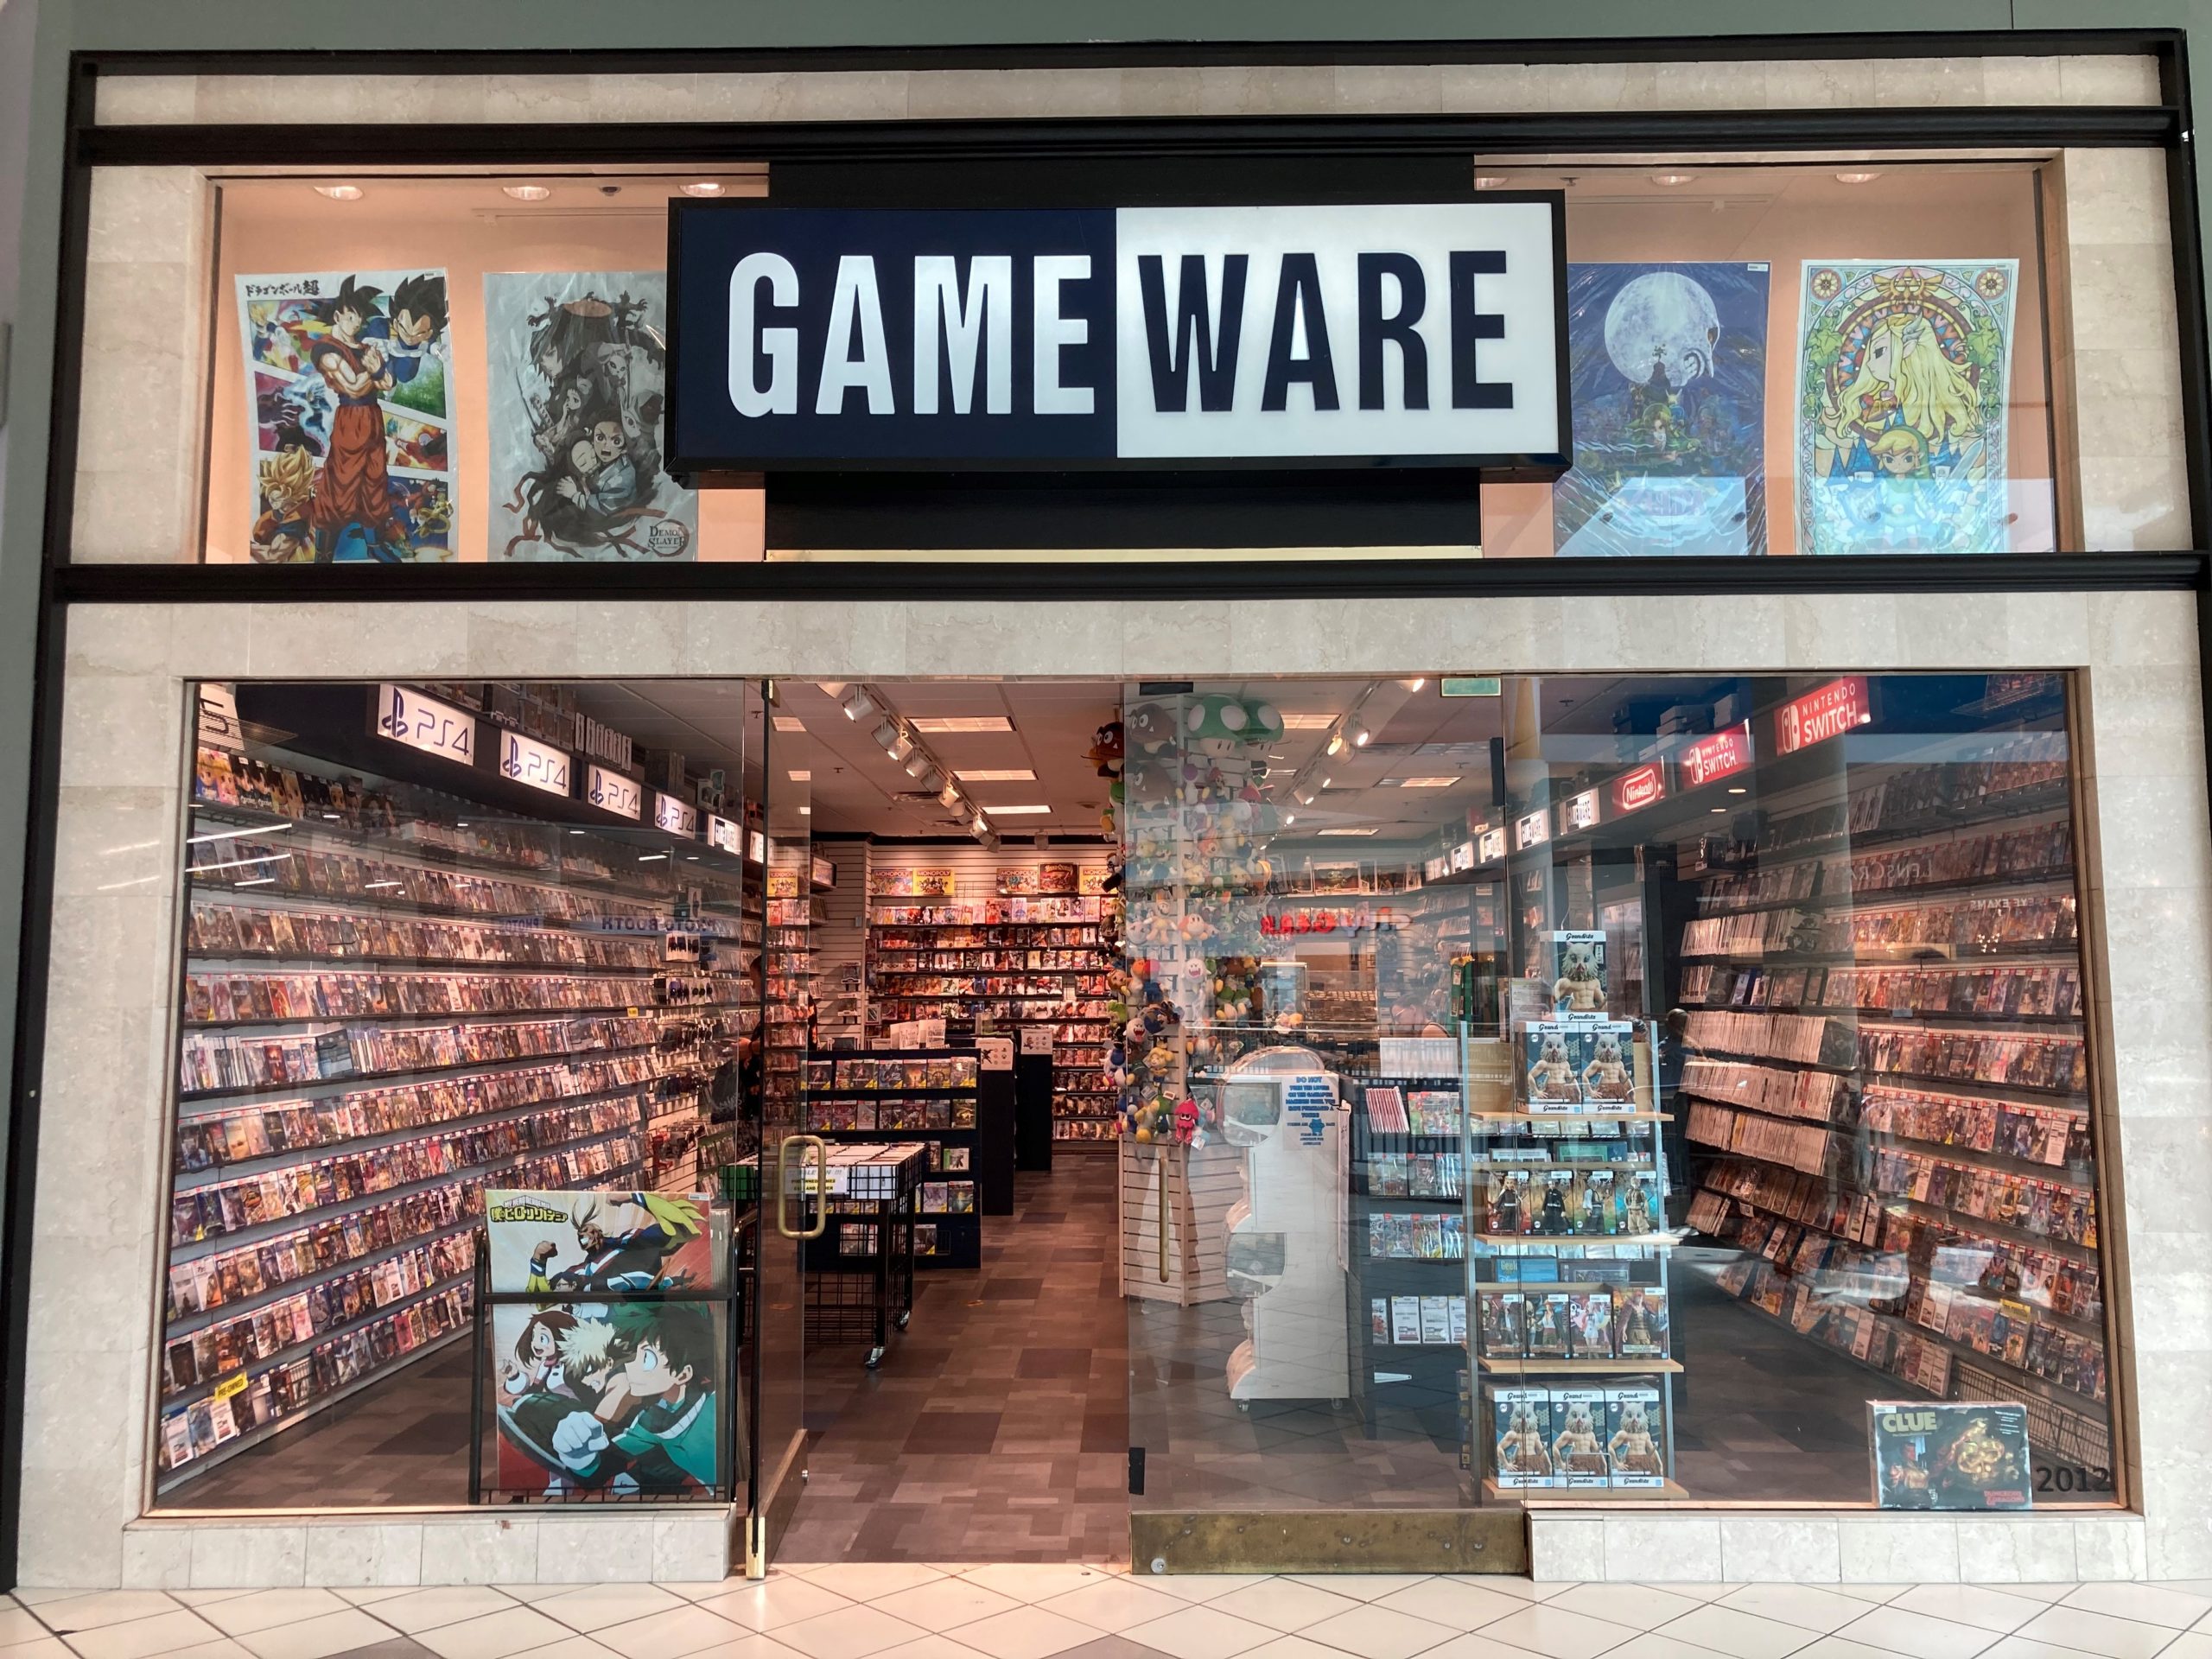 GameWare storefront as seen in the Mall of Louisiana